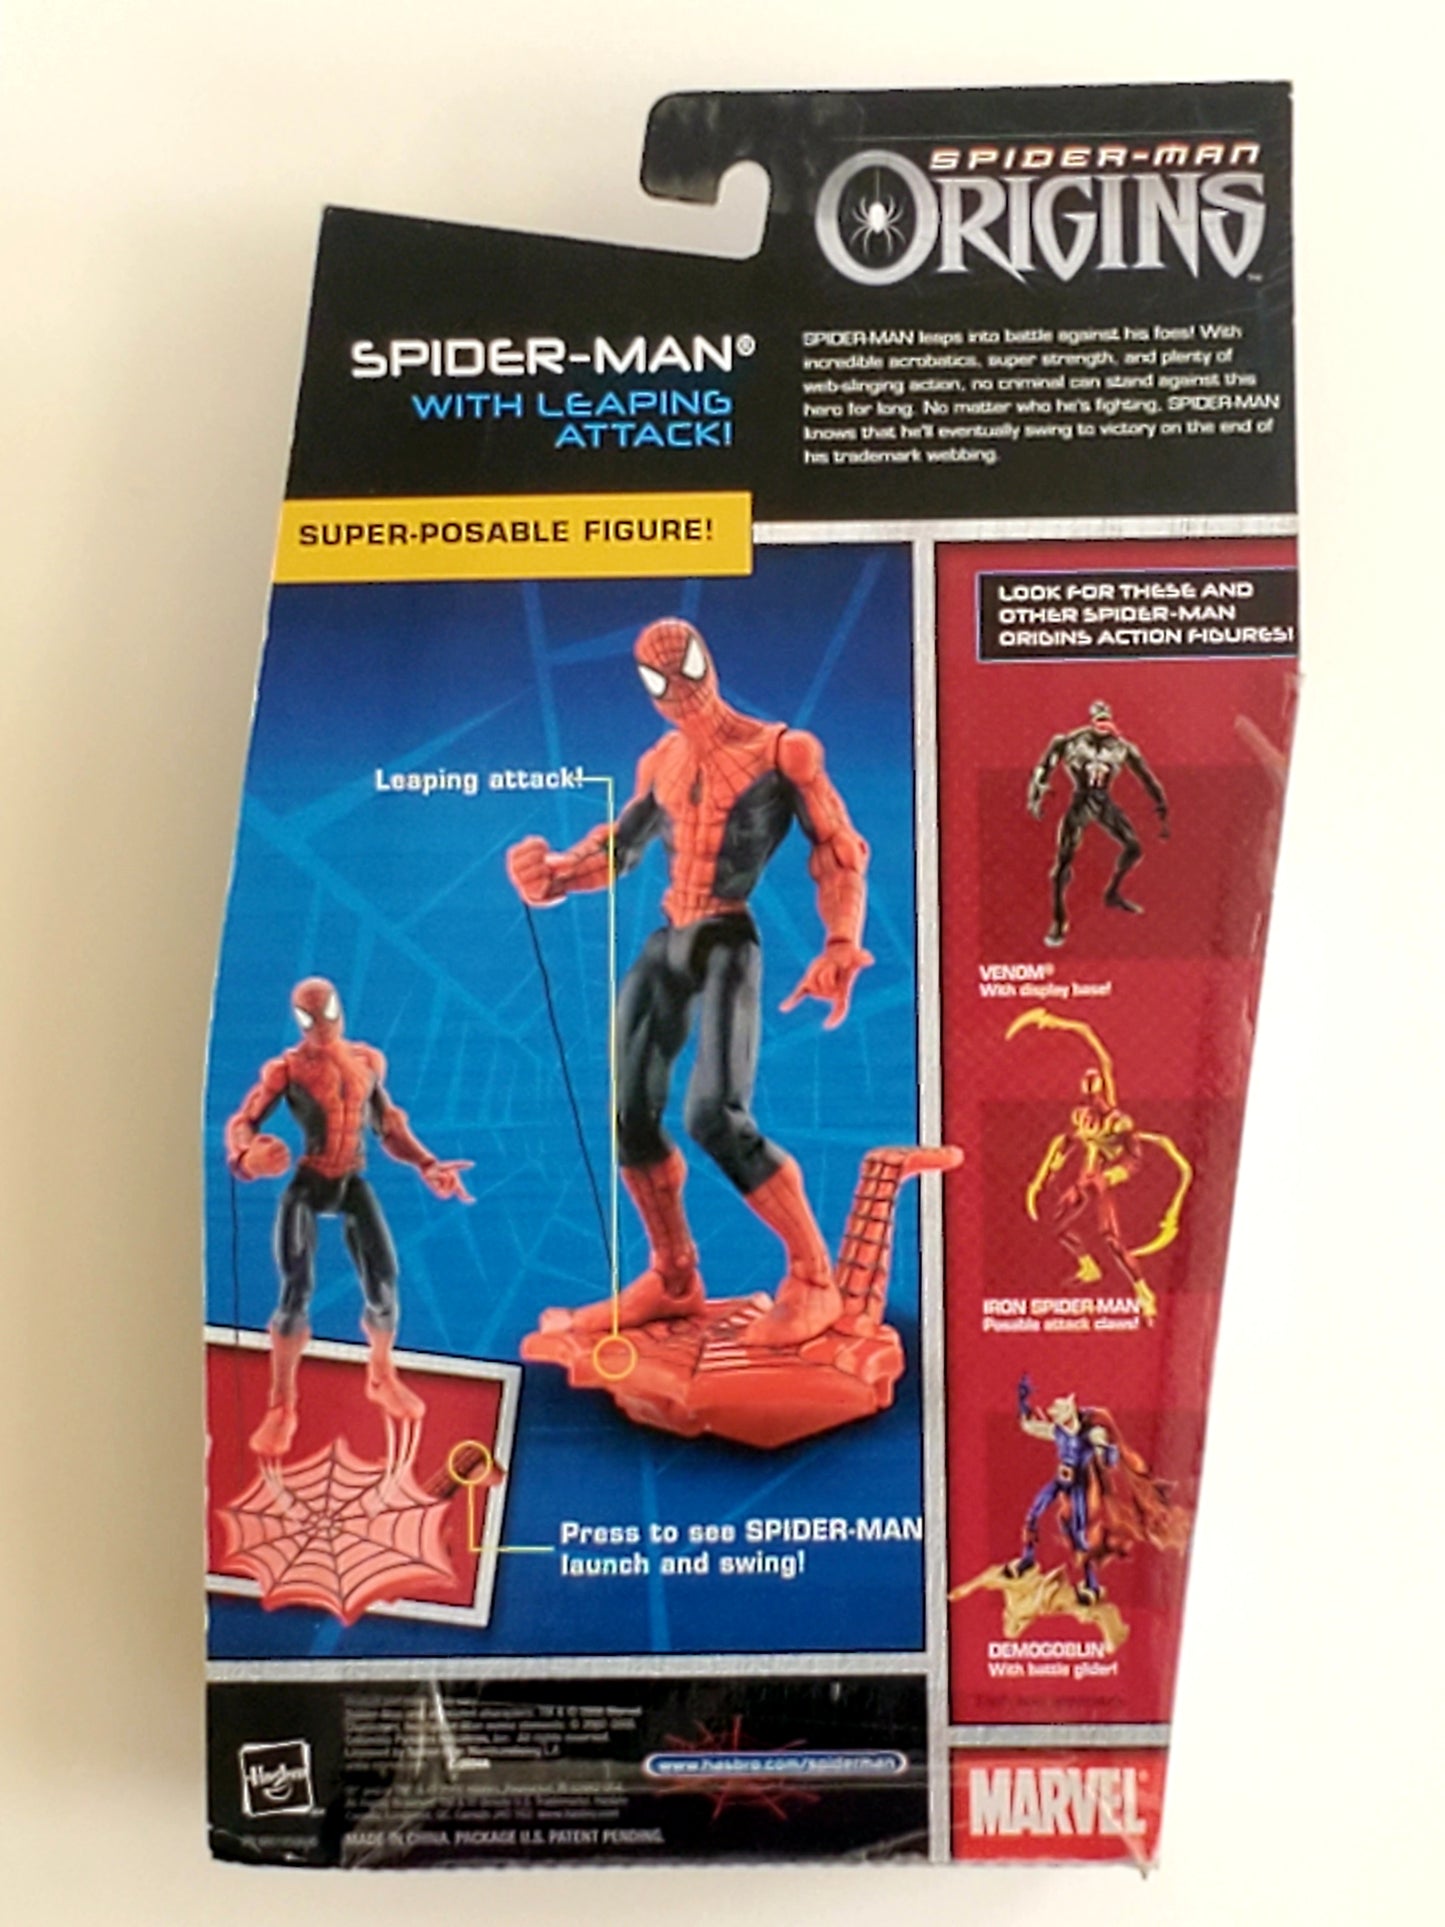 Spider-Man Origins Spider-Man with Leaping Attack